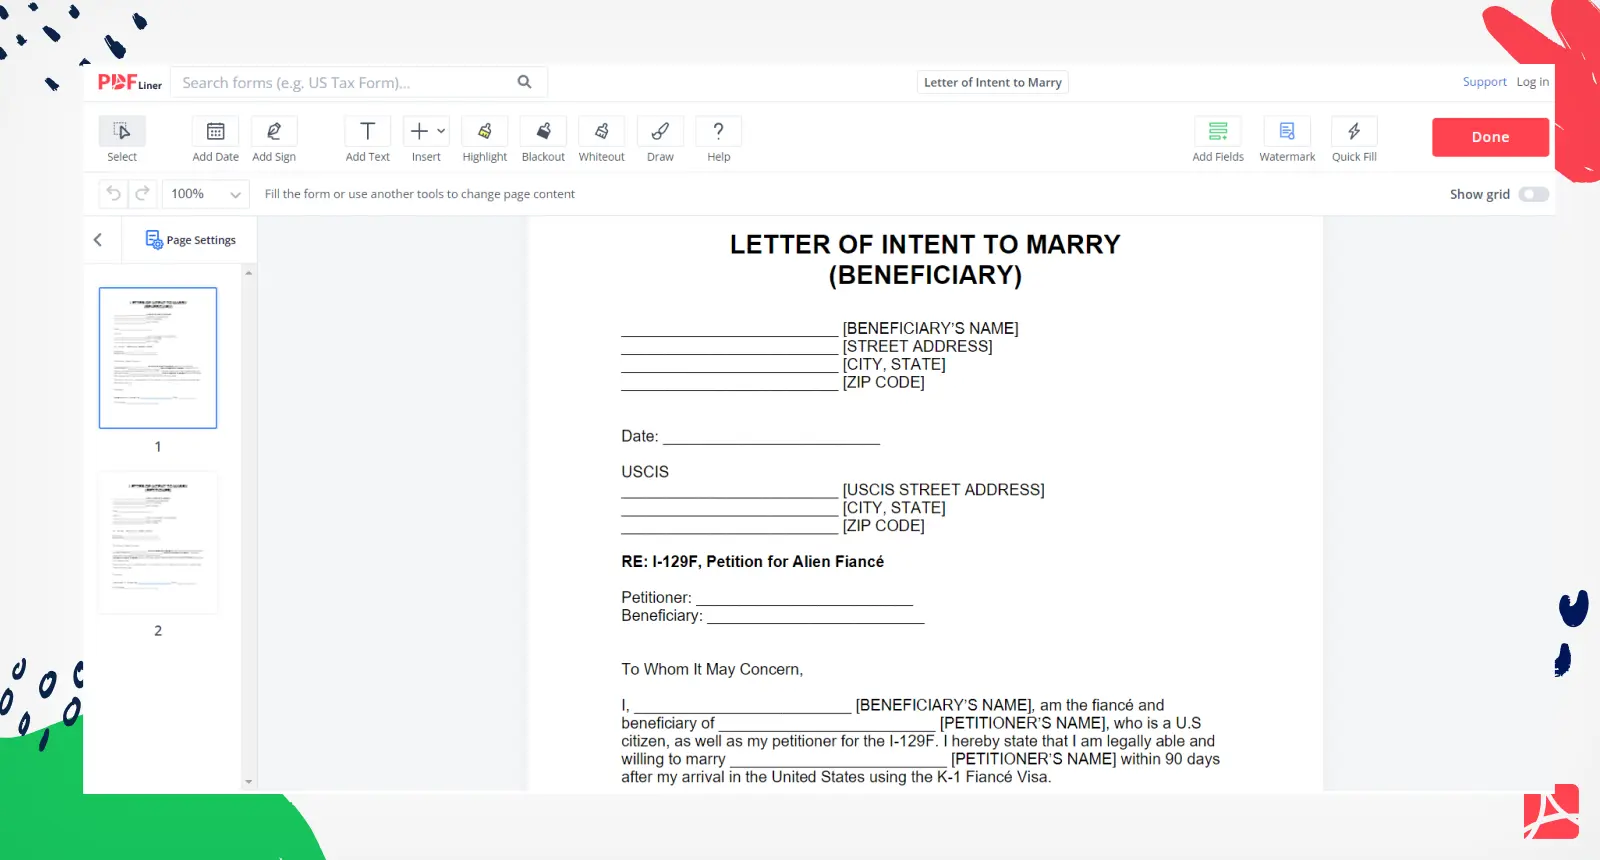 Letter of Intent to Marry Form Screenshot